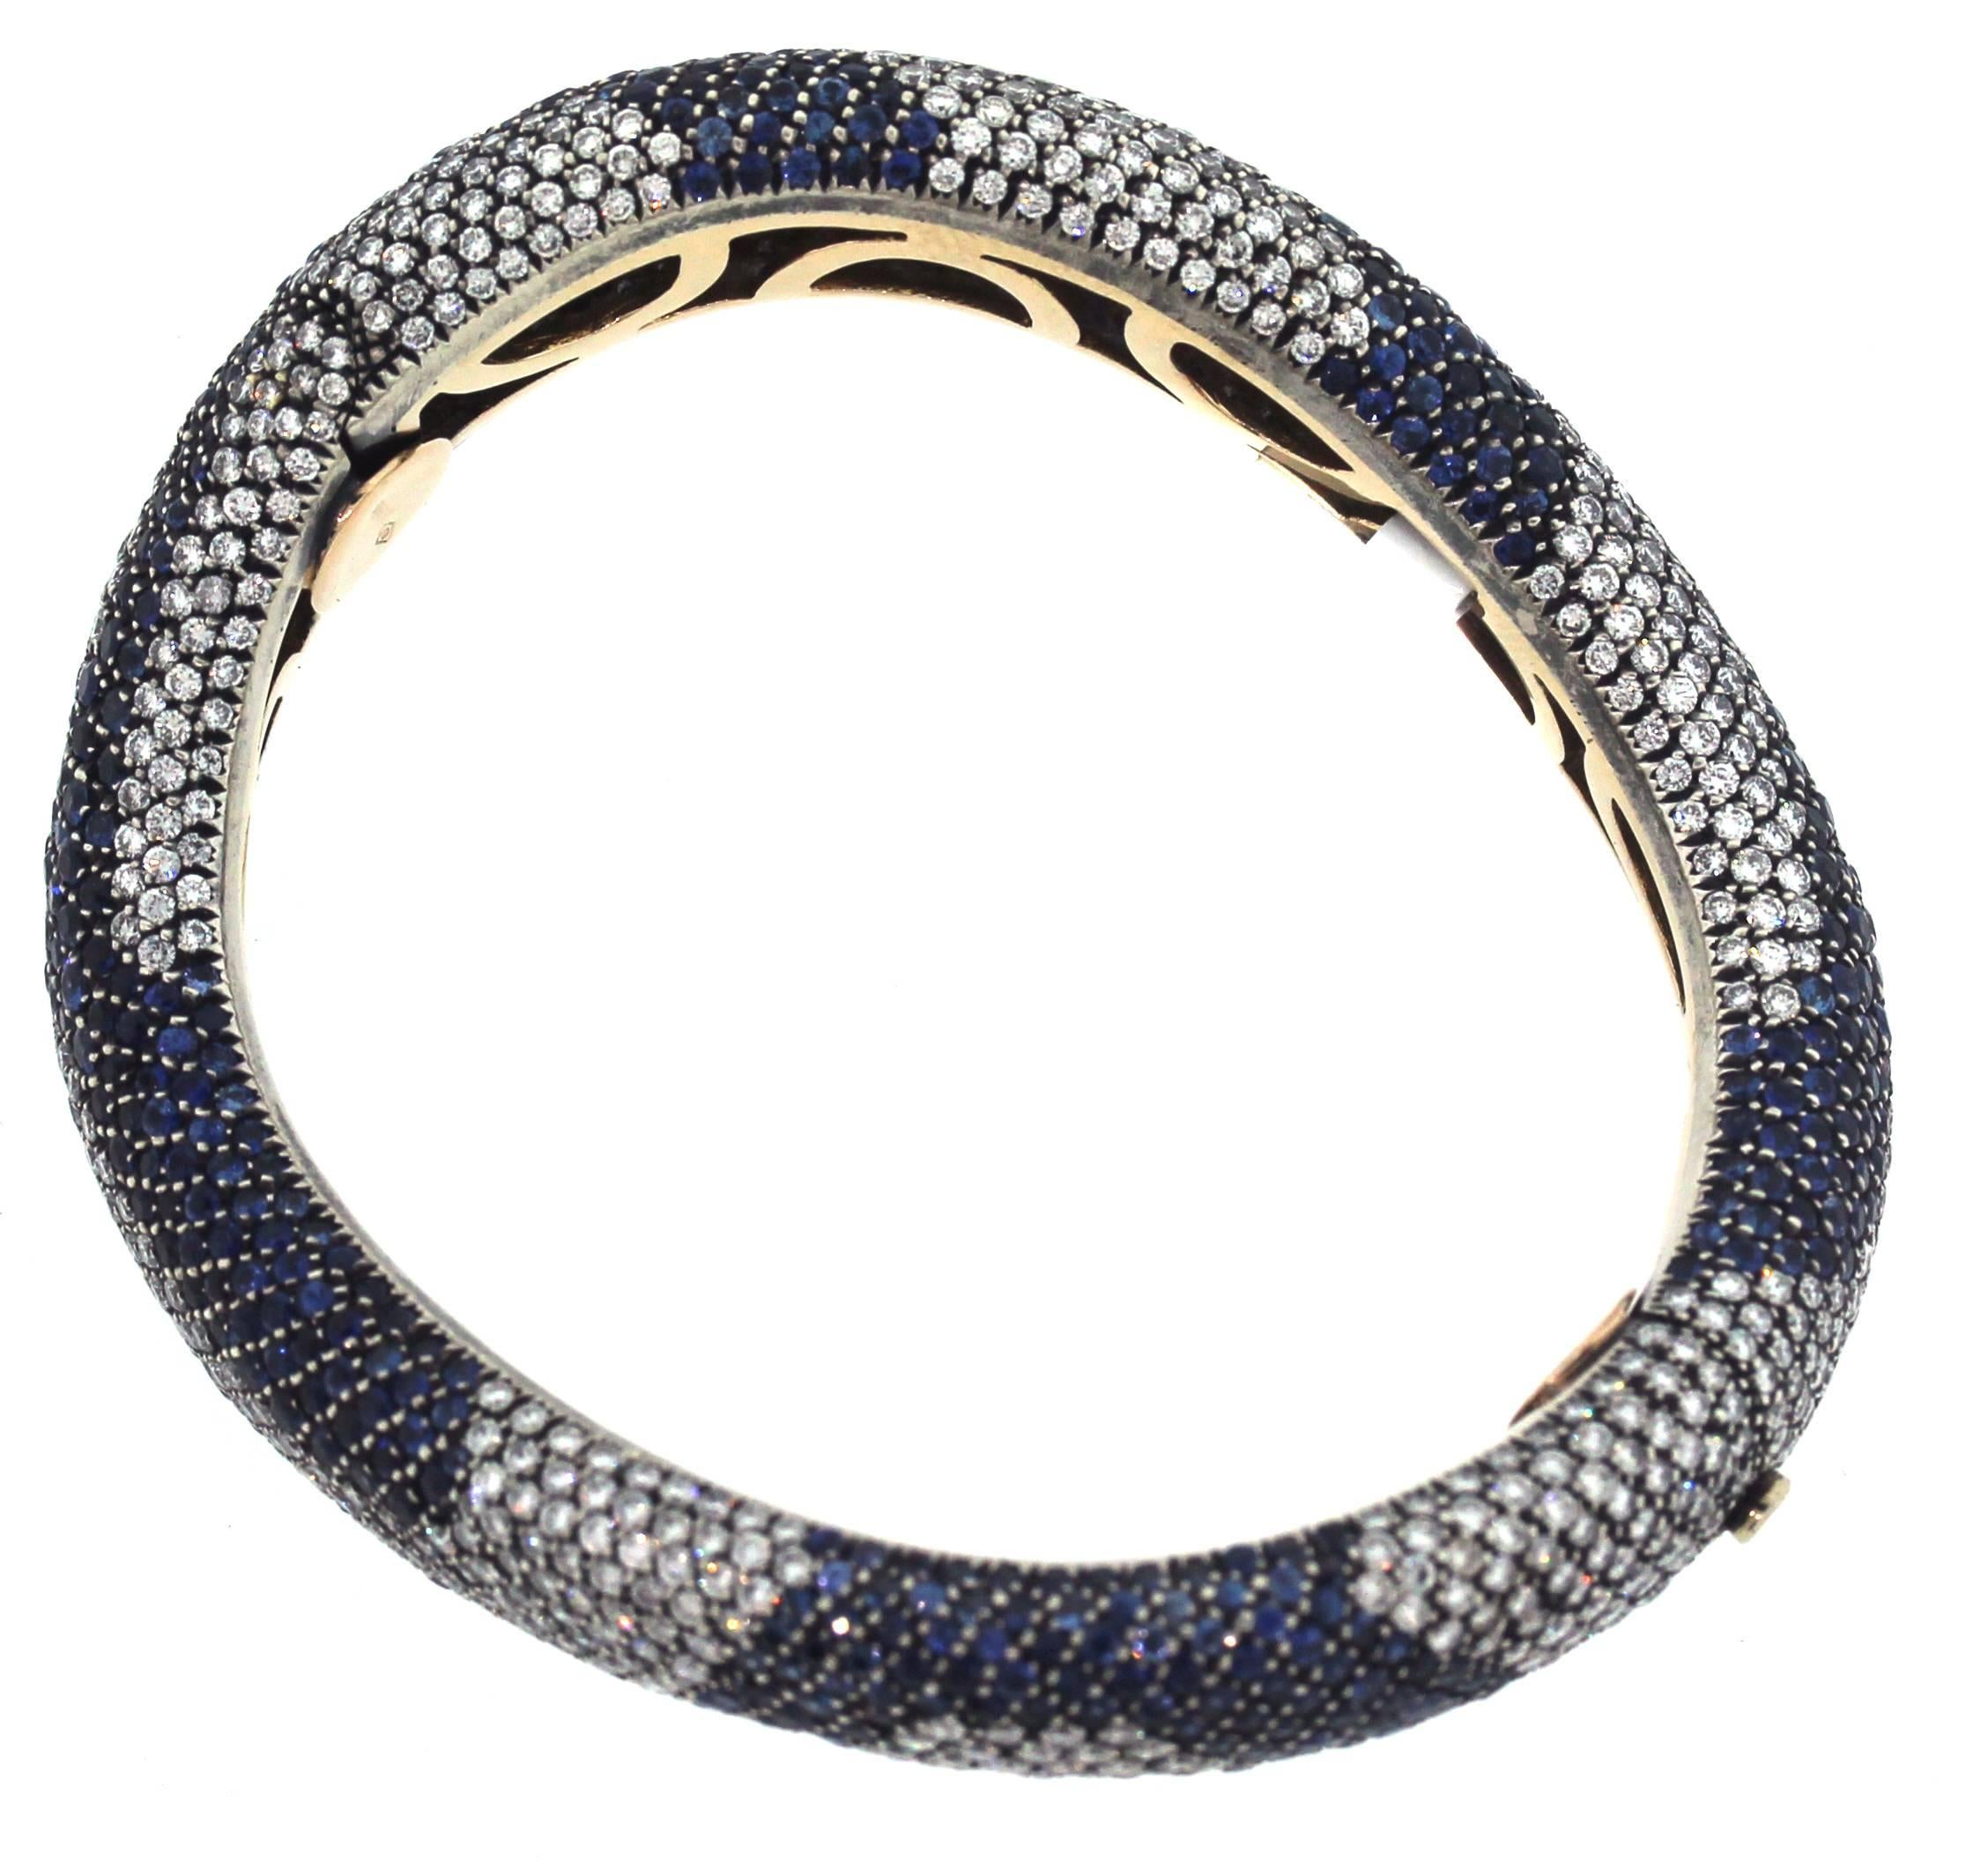 Cantamessa Shaded Blue Sapphire Diamond 18K Yellow Gold Curved Bangle Bracelet

9 carats apprx. Blue Sapphires 

8.50 carat G color, VS clarity diamonds 

Bracelet is a size 7.
0.5 inch width.

Cantamessa is an American Designer from New York